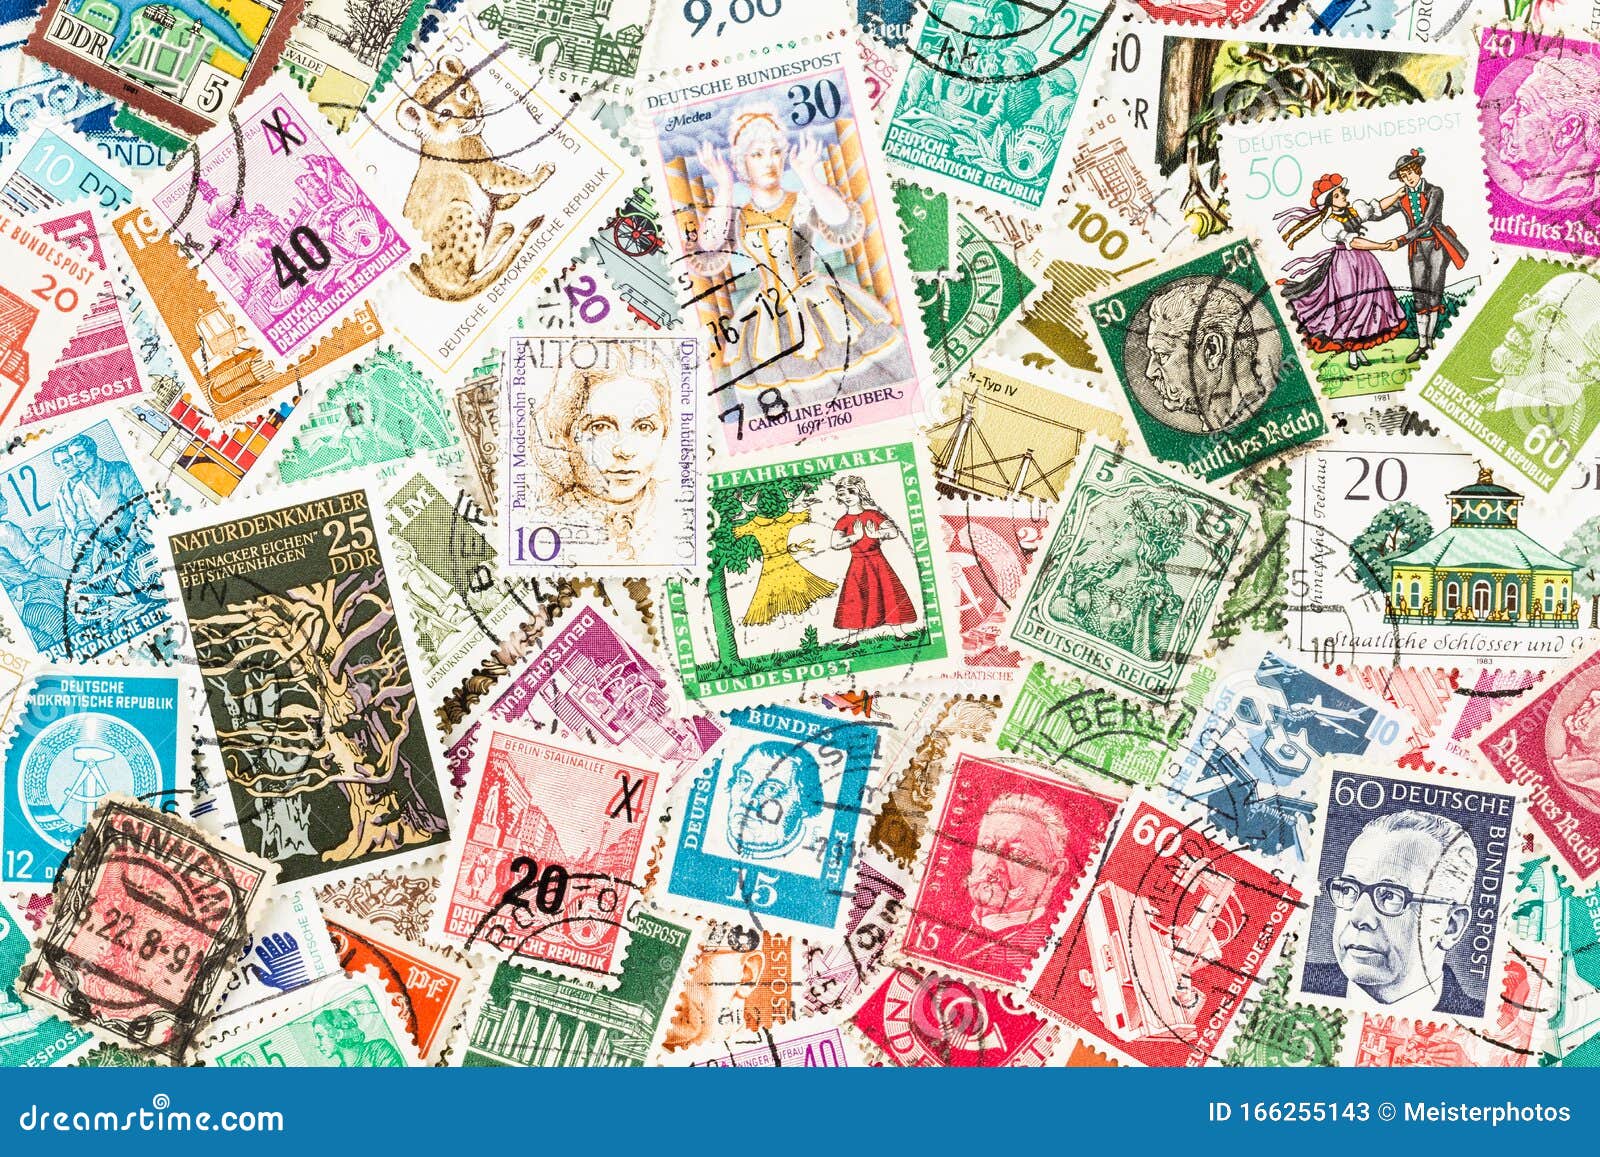 Germany Stamps - DDR and GDR Editorial Stock Photo - Image of deutsche ...